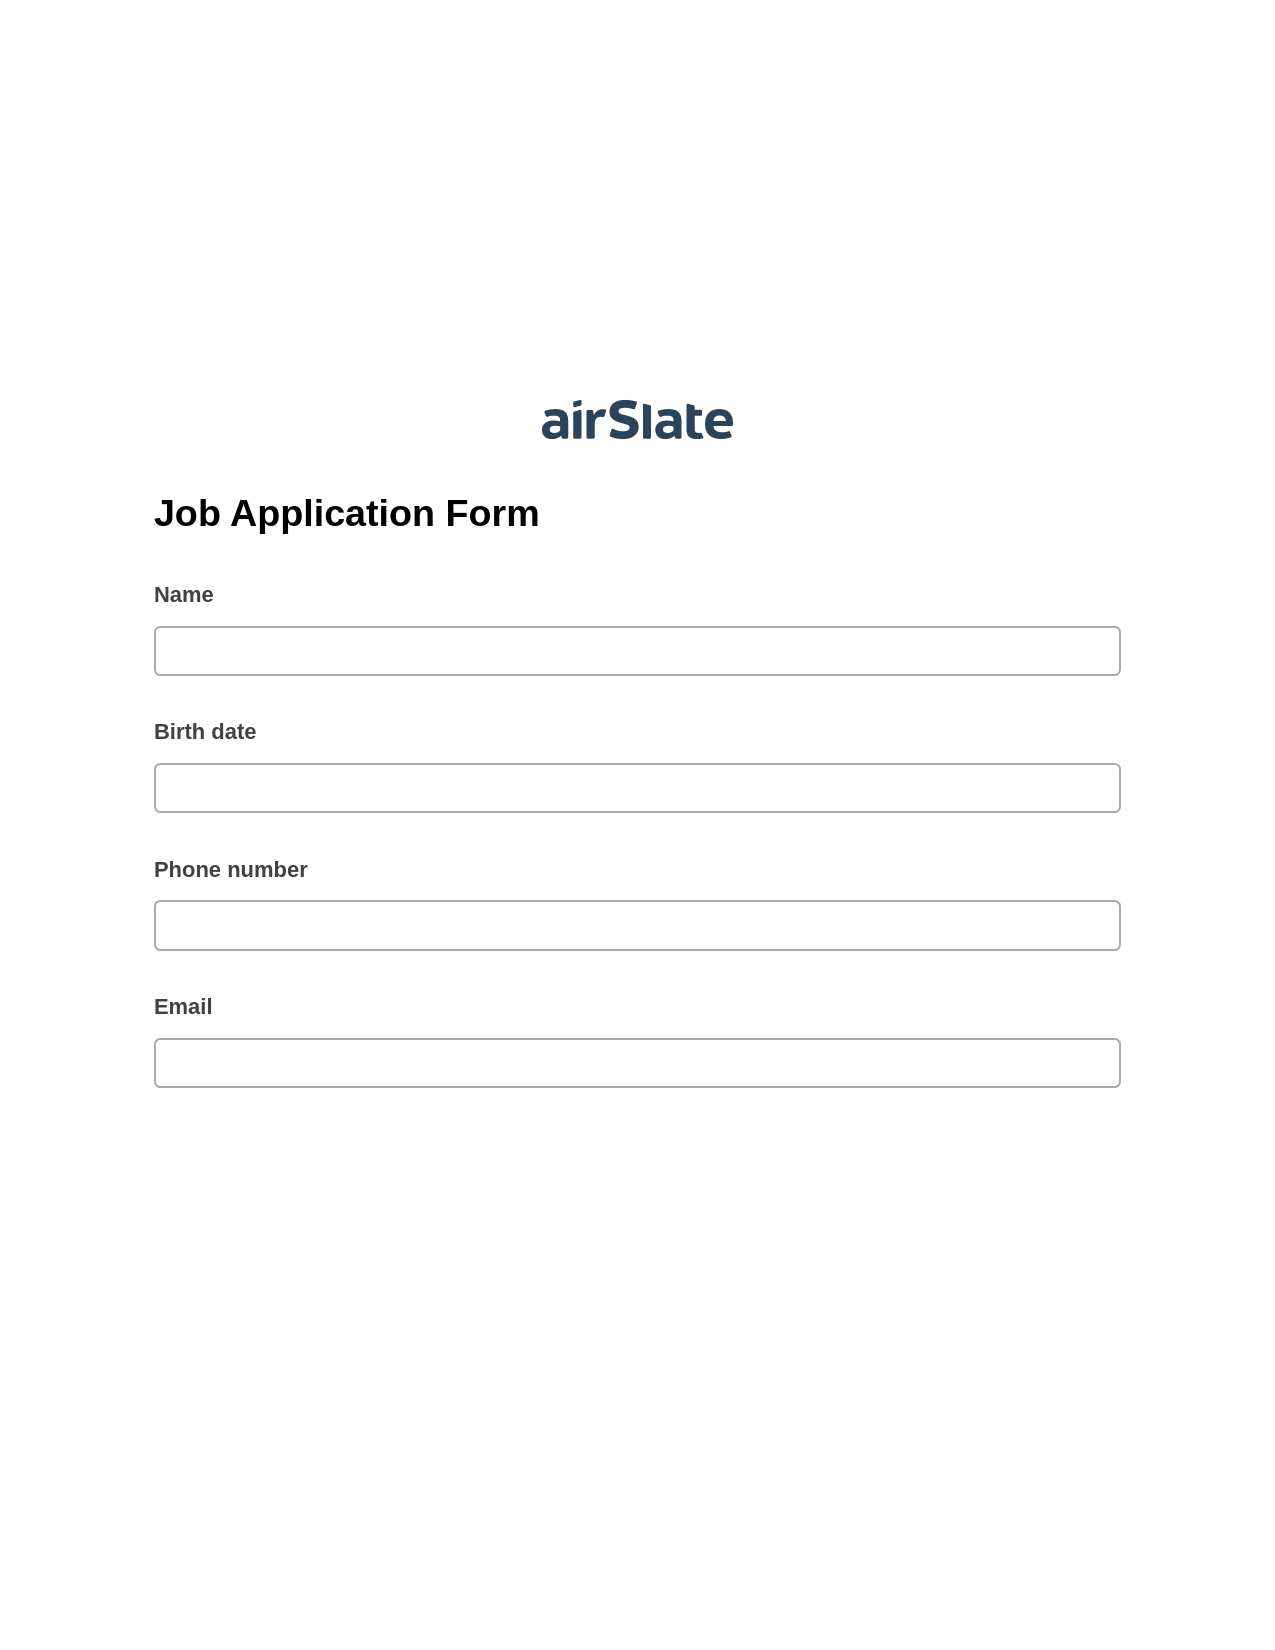 Multirole Job Application Form Pre-fill Slate from MS Dynamics 365 Records Bot, Create MS Dynamics 365 Records Bot, Email Notification Postfinish Bot